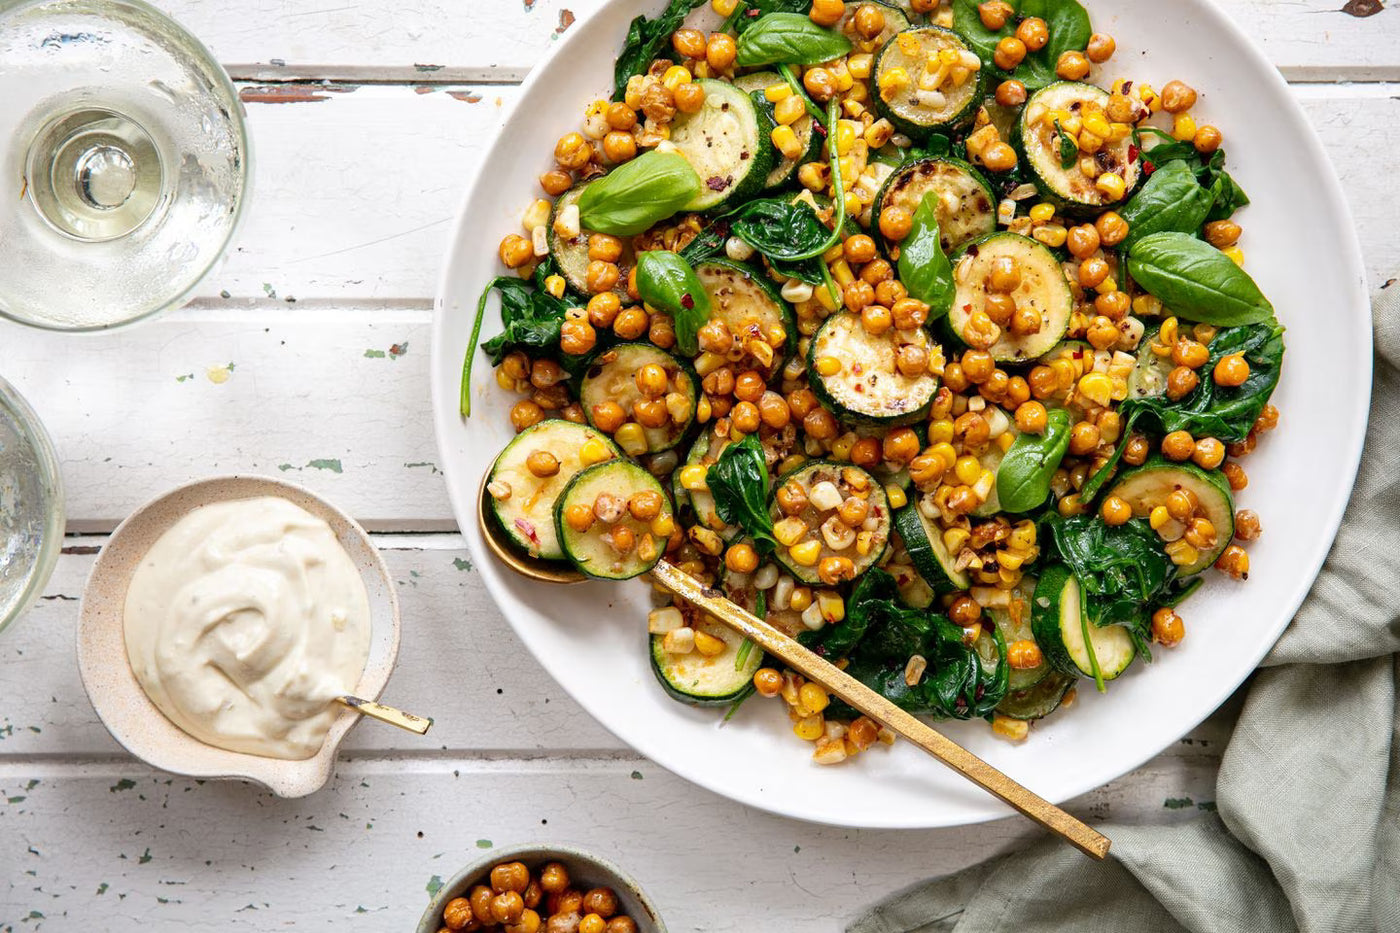 A Full-Of-Flavour Courgette & Corn Salad Recipe With Crispy Chickpeas